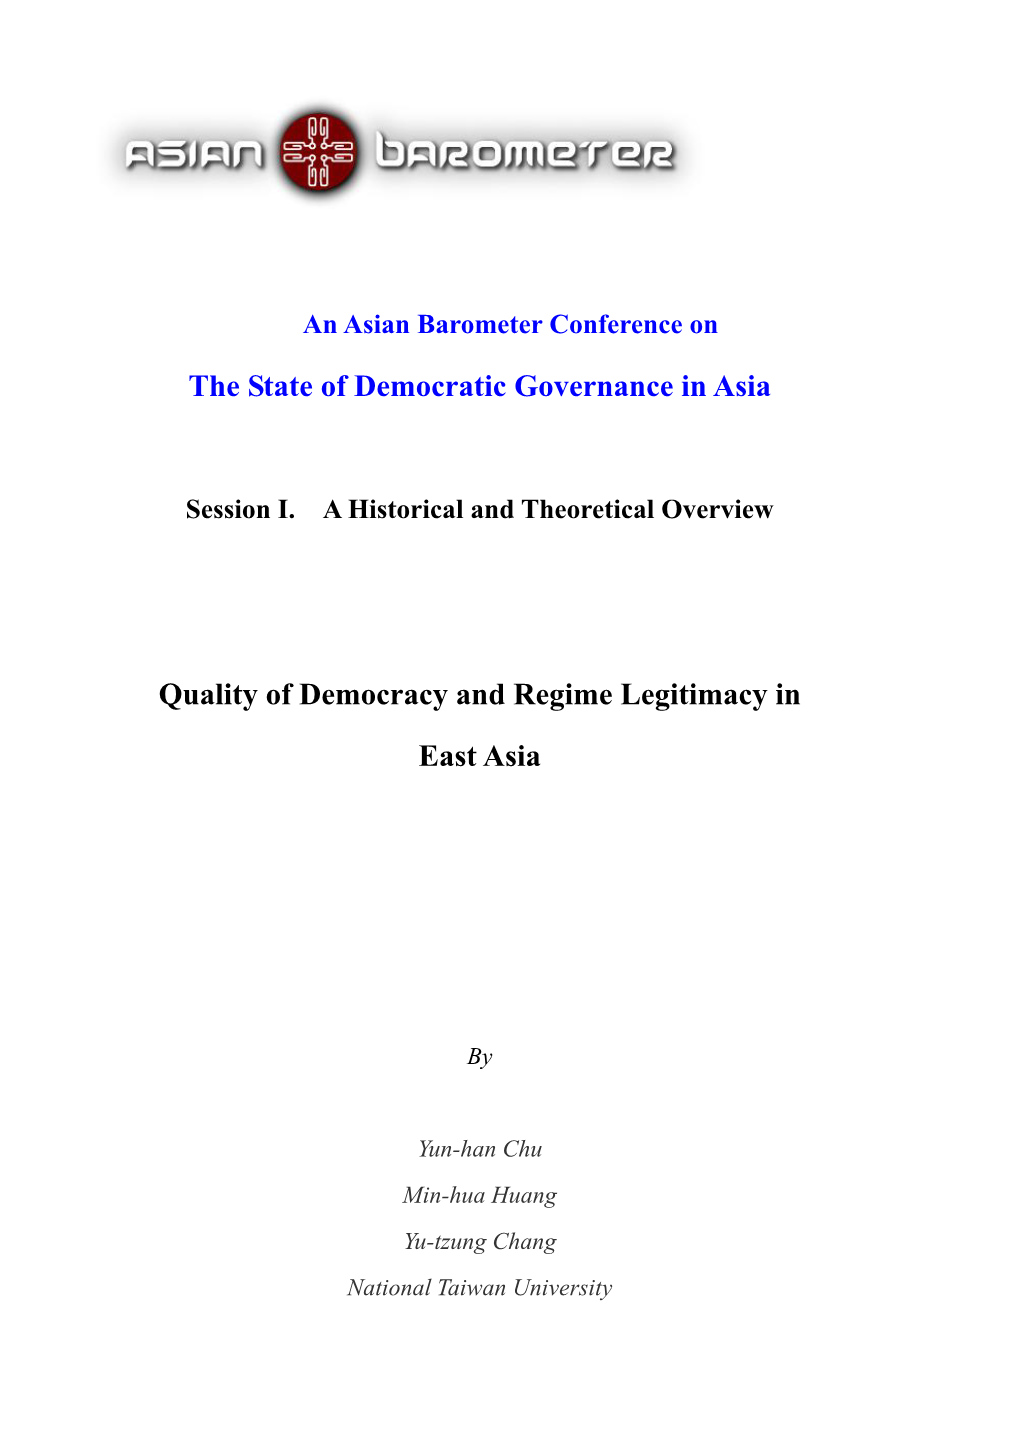 Quality of Democracy and Regime Legitimacy in East Asia